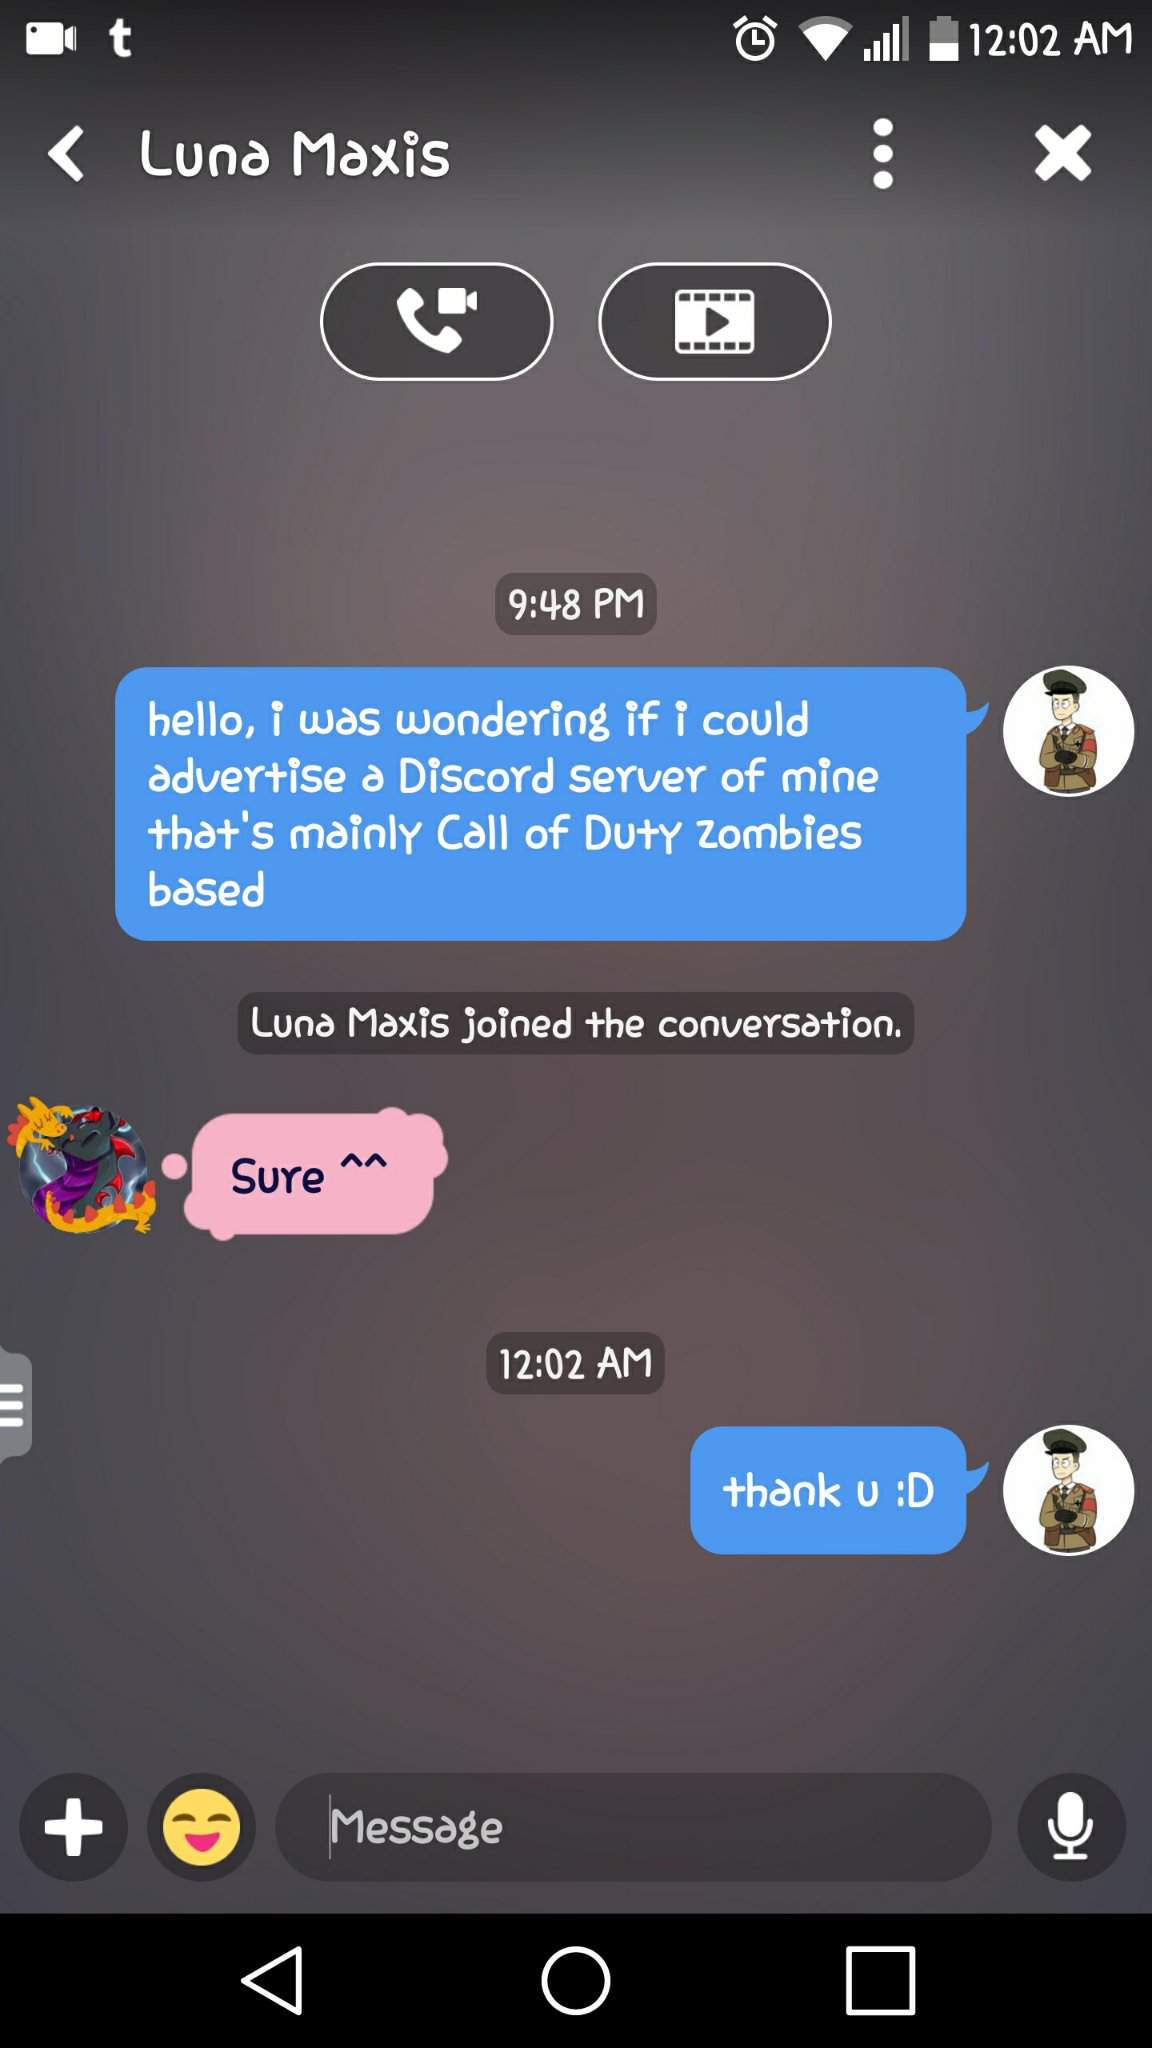 call of duty discord